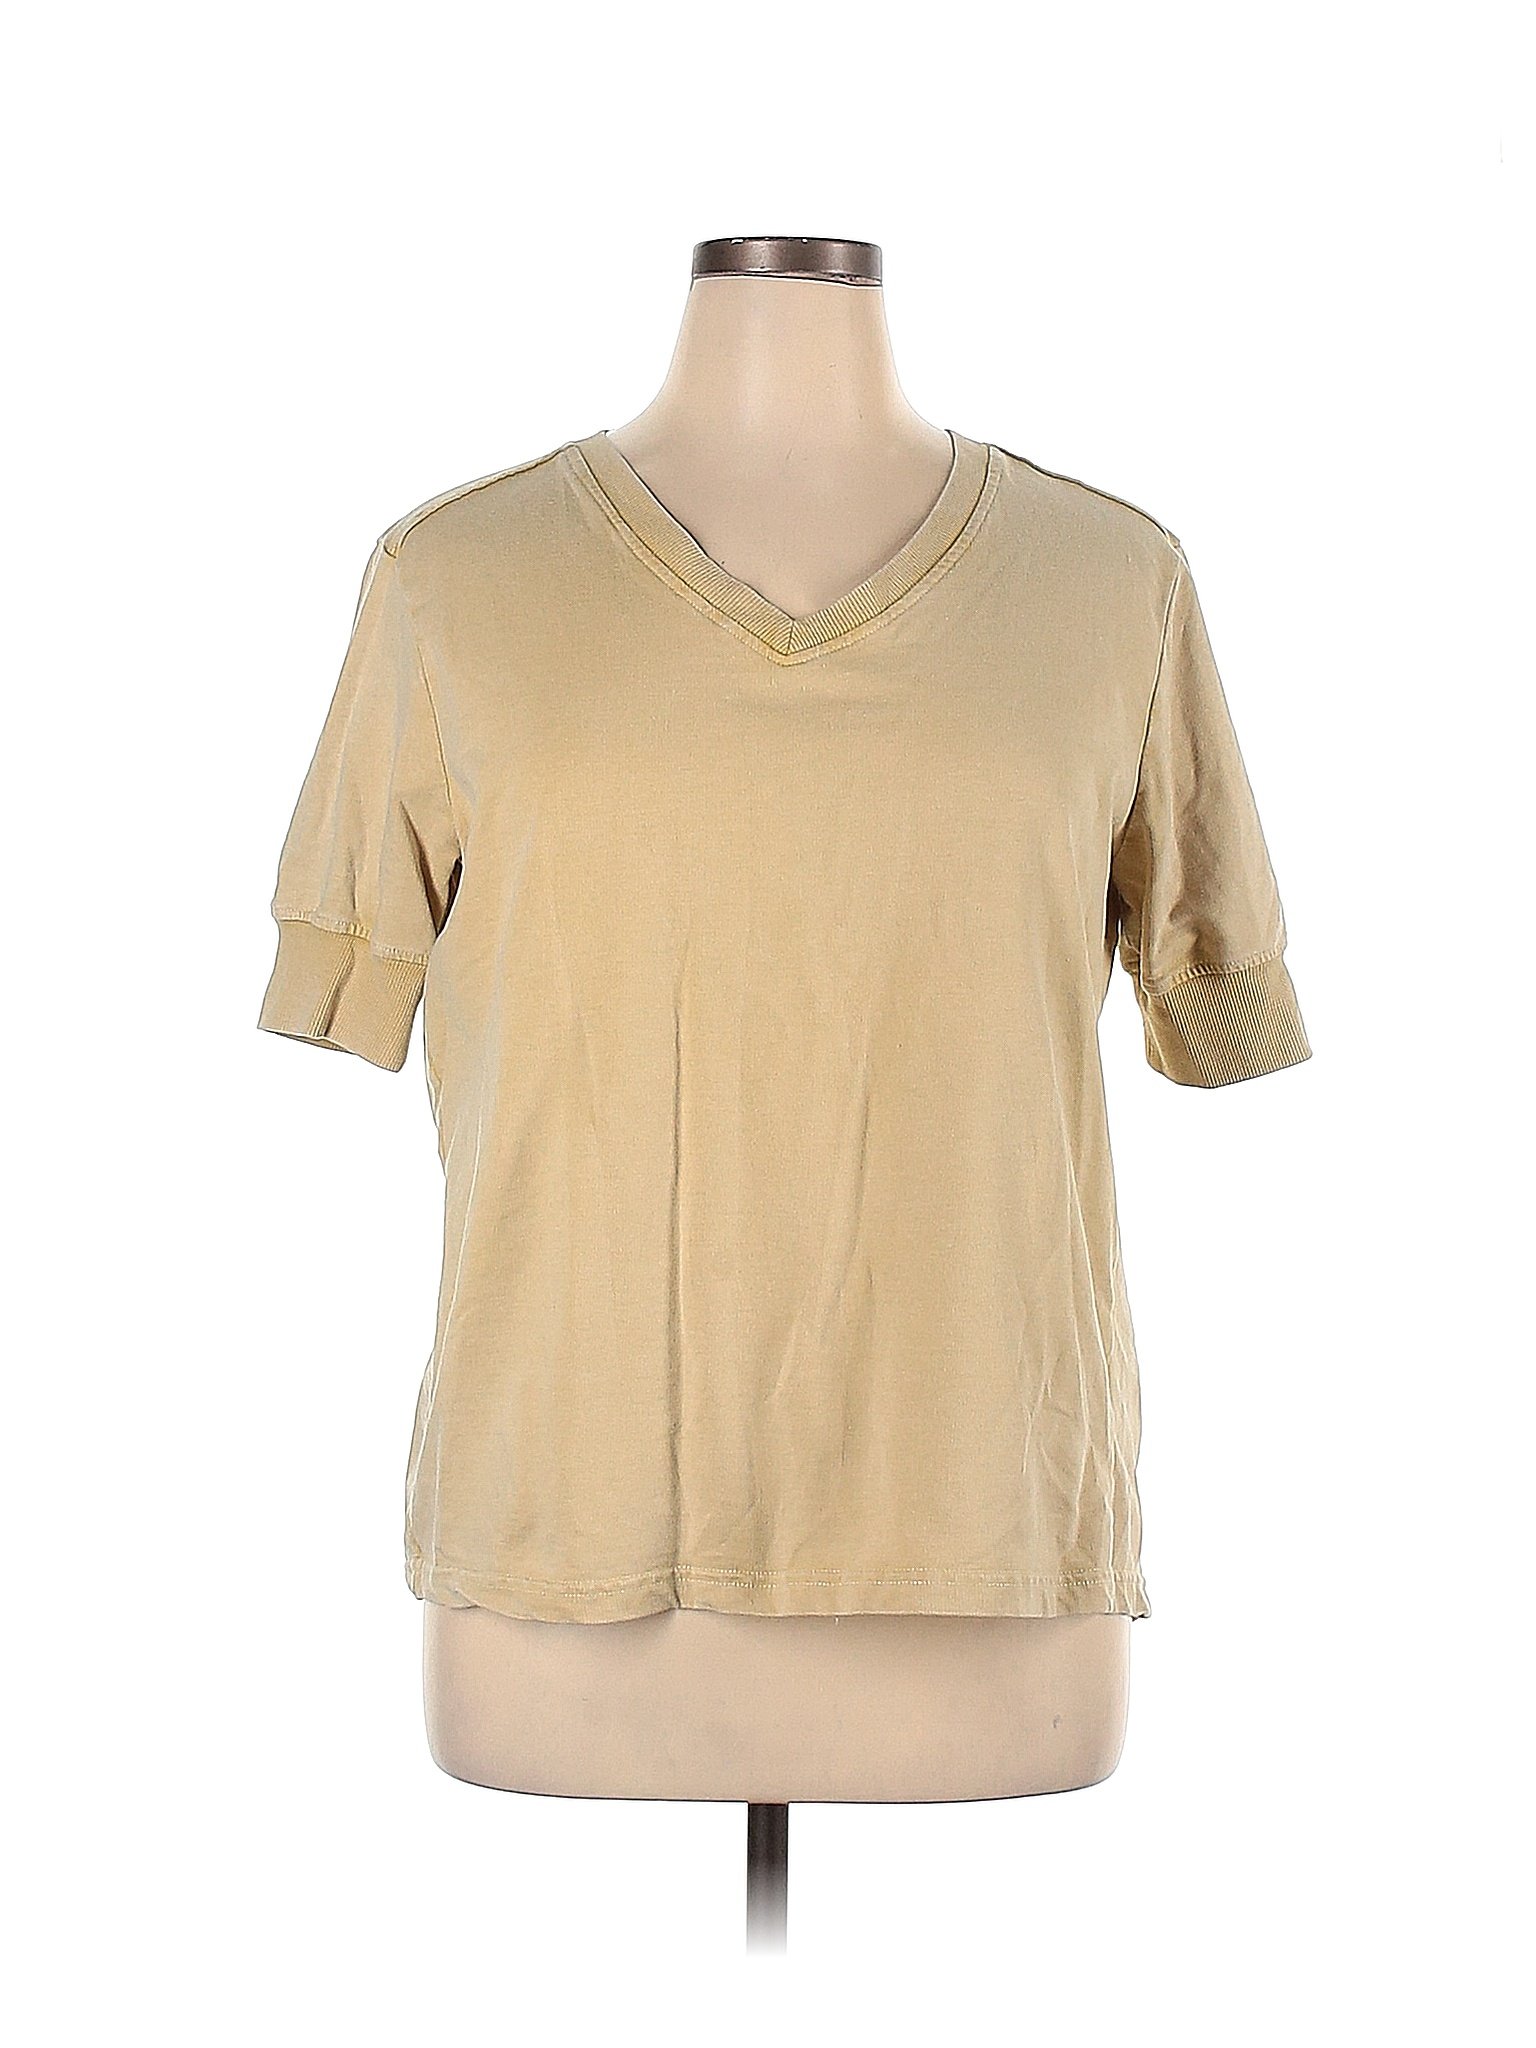 Jane and Delancey Solid Colored Tan Sweatshirt Size XL - 70% off | thredUP